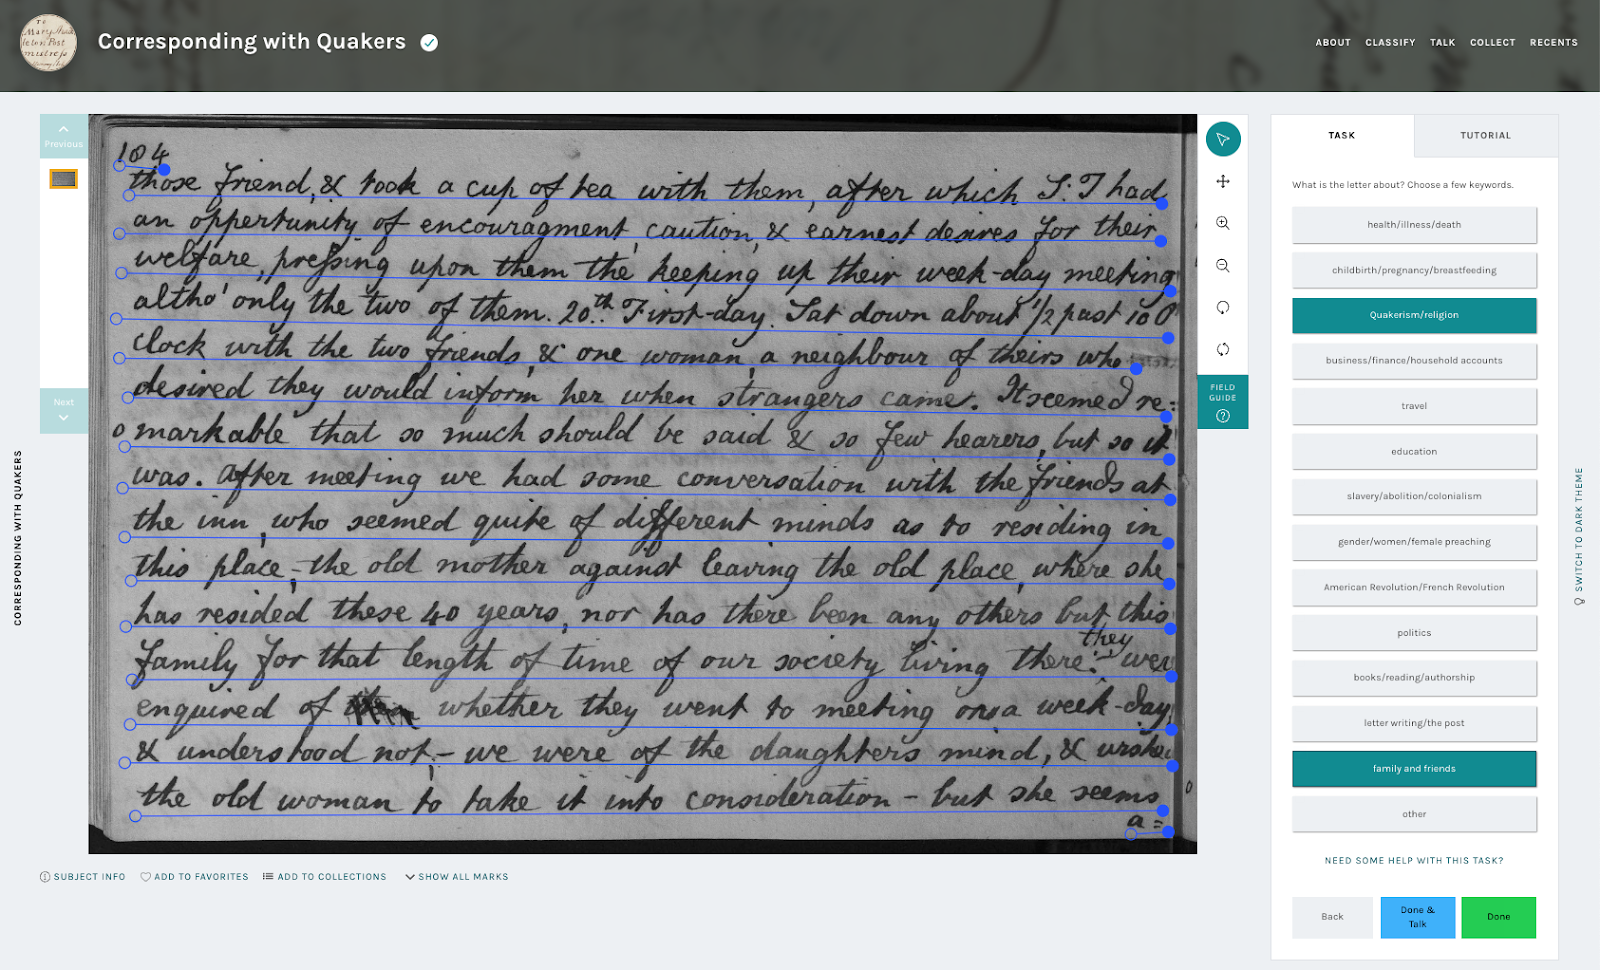 A screenshot of a zooniverse transcription project utilizing a question task. The project is titled ‘Corresponding with Quakers’. The main part of the page is a handwritten journal entry, with each line of text underlined in blue, representing the transcriptions that have already been performed on the image. On the right is a question task. The question reads: ‘What is the letter about? Choose a few keywords’ Below is a list of 14 options for users to select, including ‘health/illness/death,’ ‘travel,’ and ‘slavery/abolition/colonialism.’ Here, the user has selected ‘Quakerism/religion’ and ‘family and friends’ to describe the content of the image.